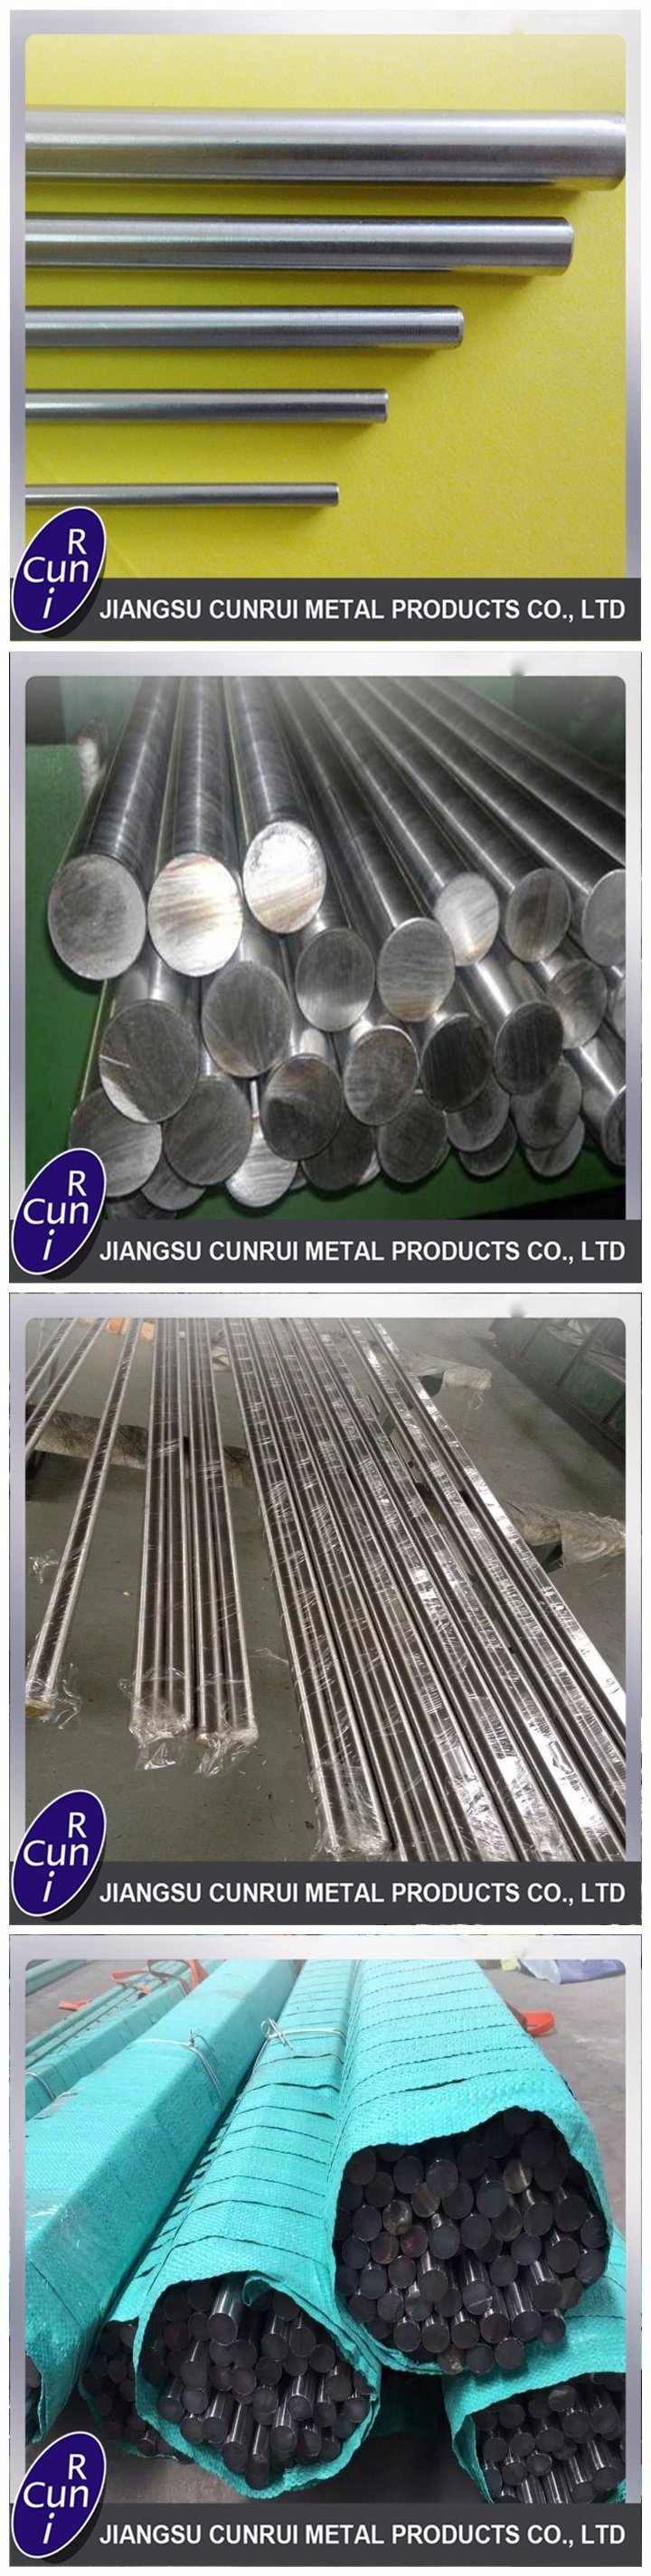 304 Stainless Steel Round Bar Price Per Kg, Stainless Steel Rod